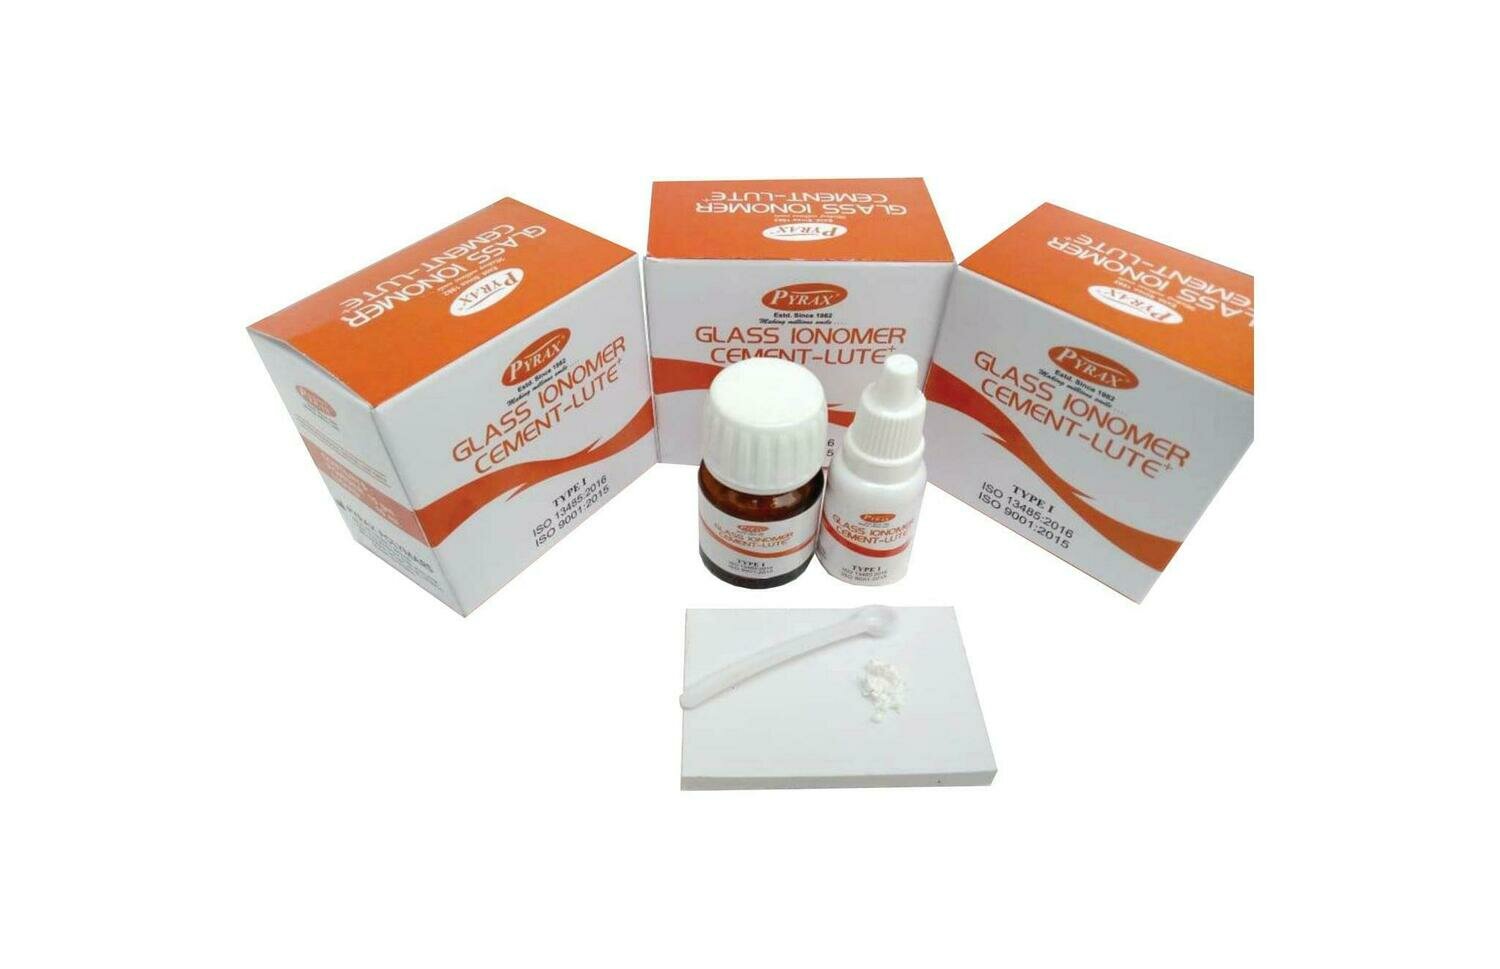 GLASS IONOMER CEMENT LUTING (TYPE I)